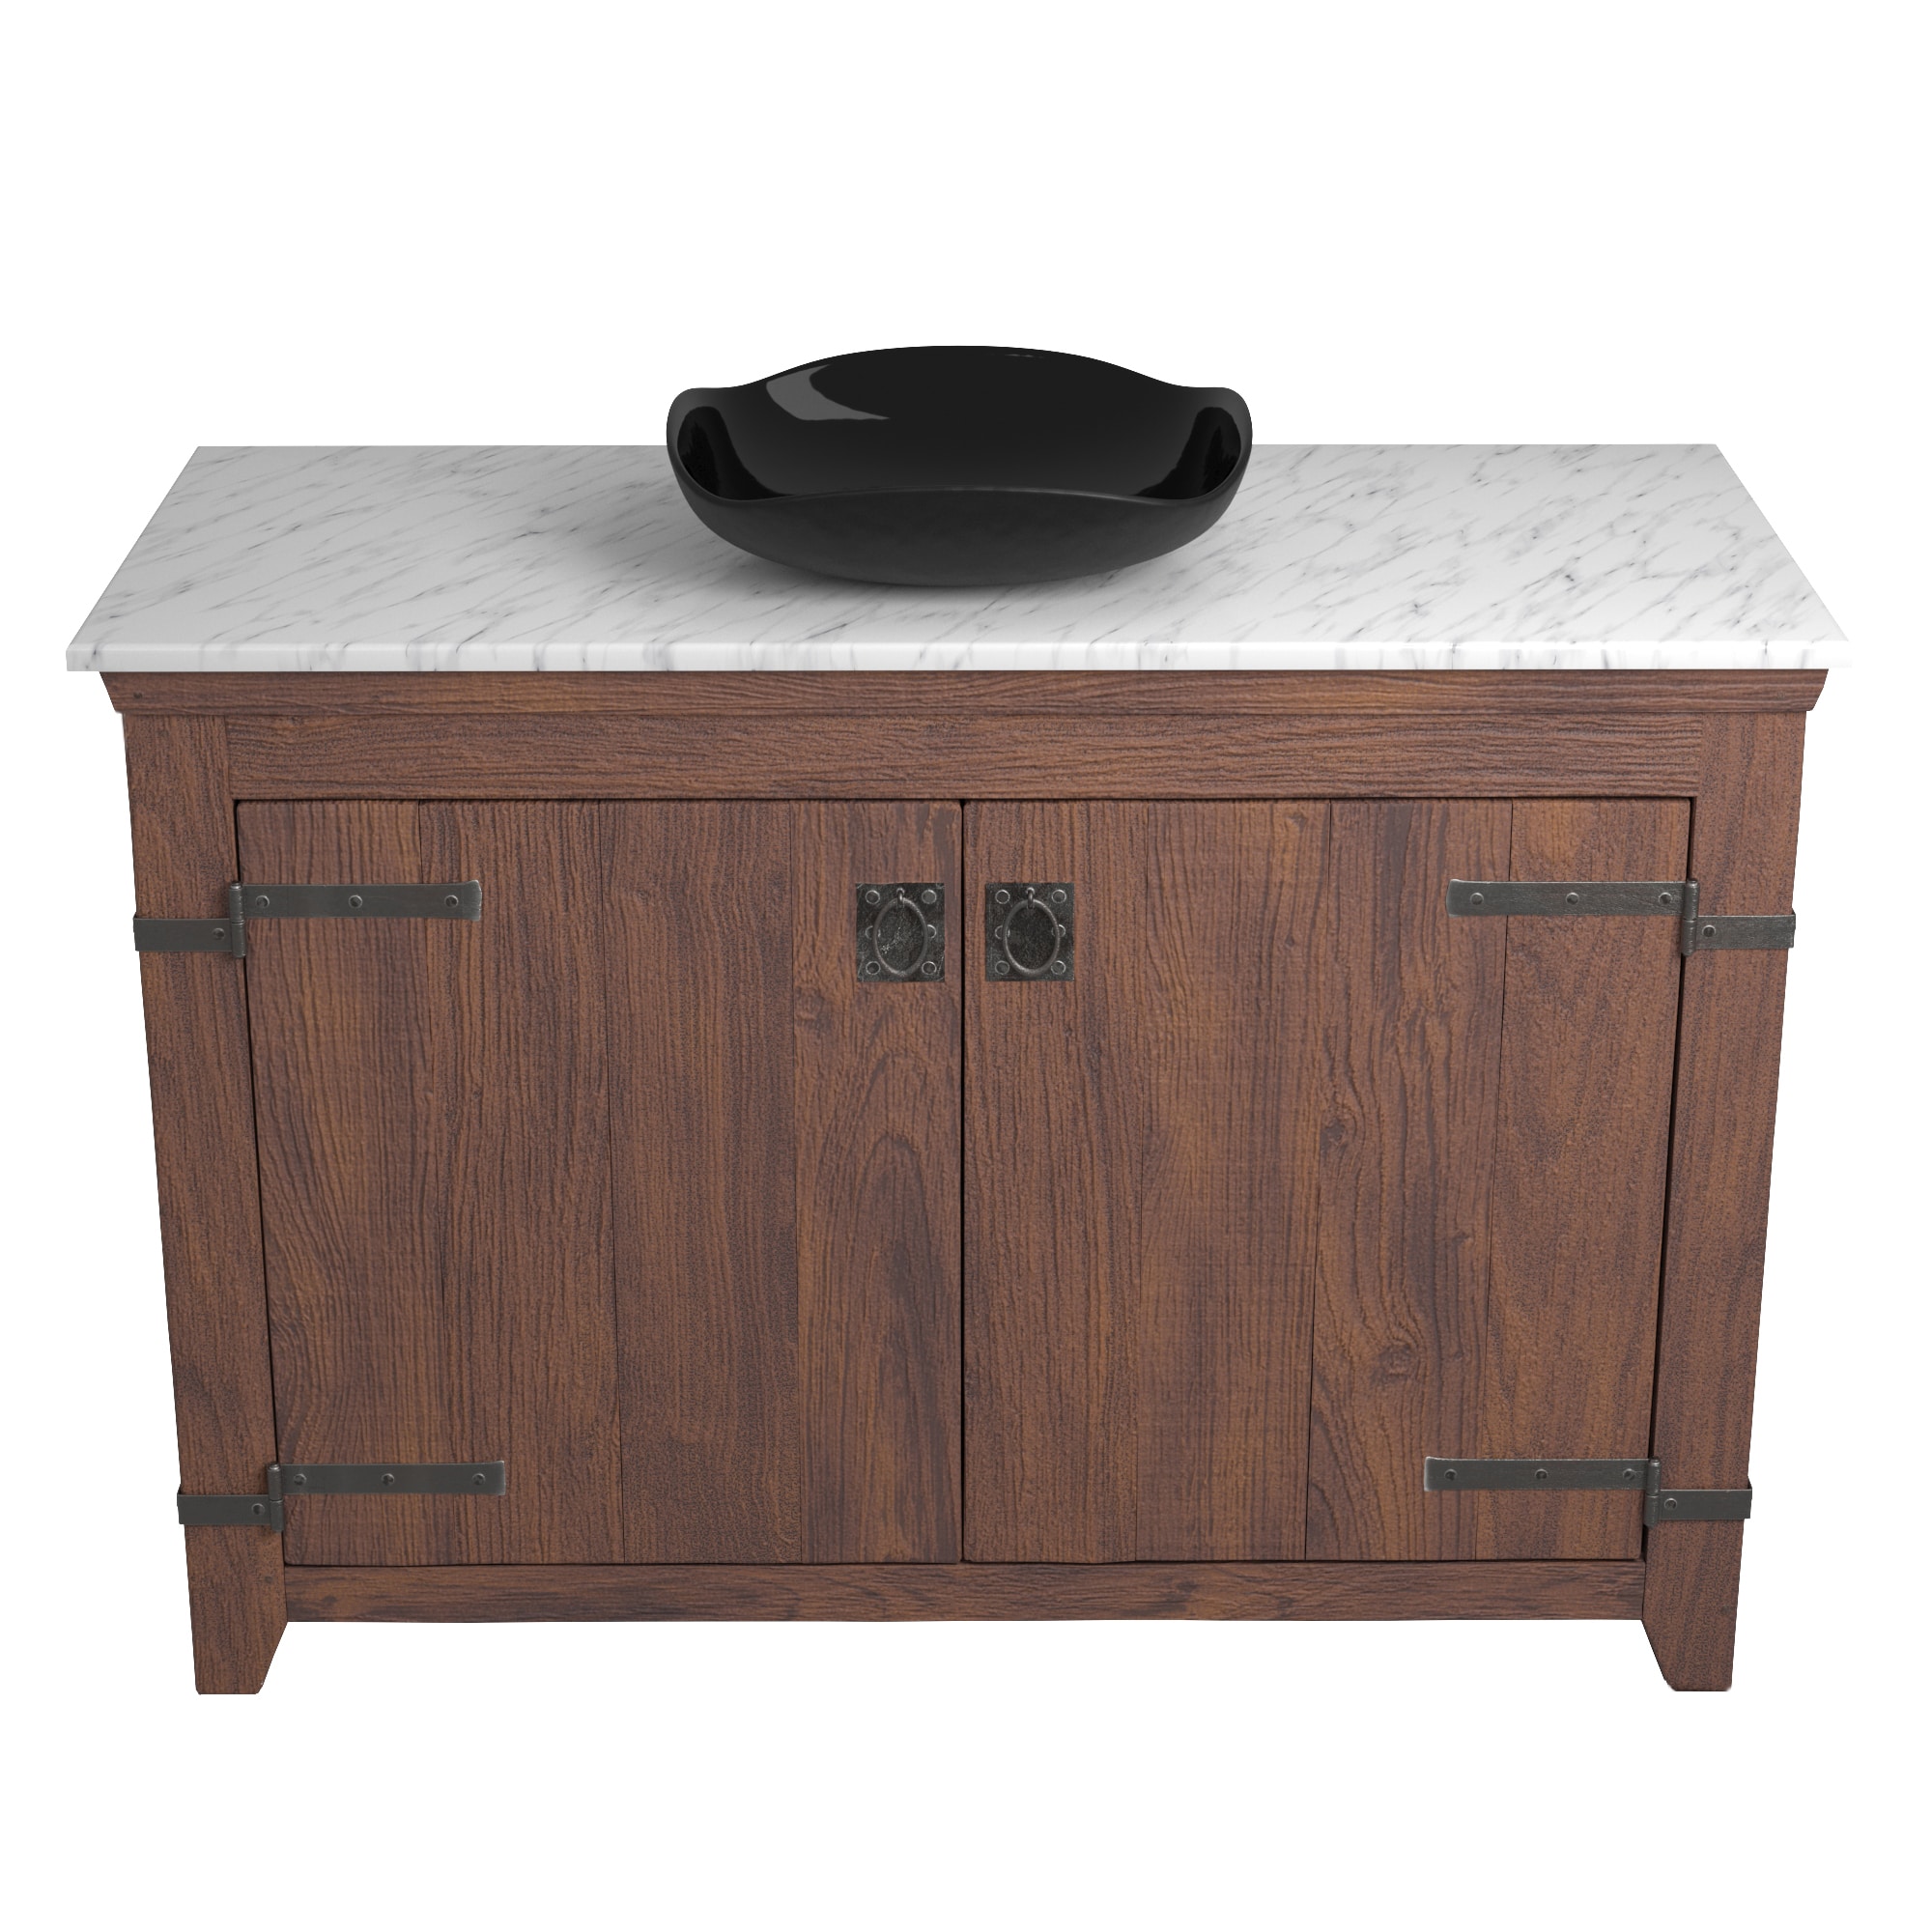 Native Trails 48" Americana Vanity in Chestnut with Carrara Marble Top and Lido in Abyss, No Faucet Hole, BND48-VB-CT-MG-012